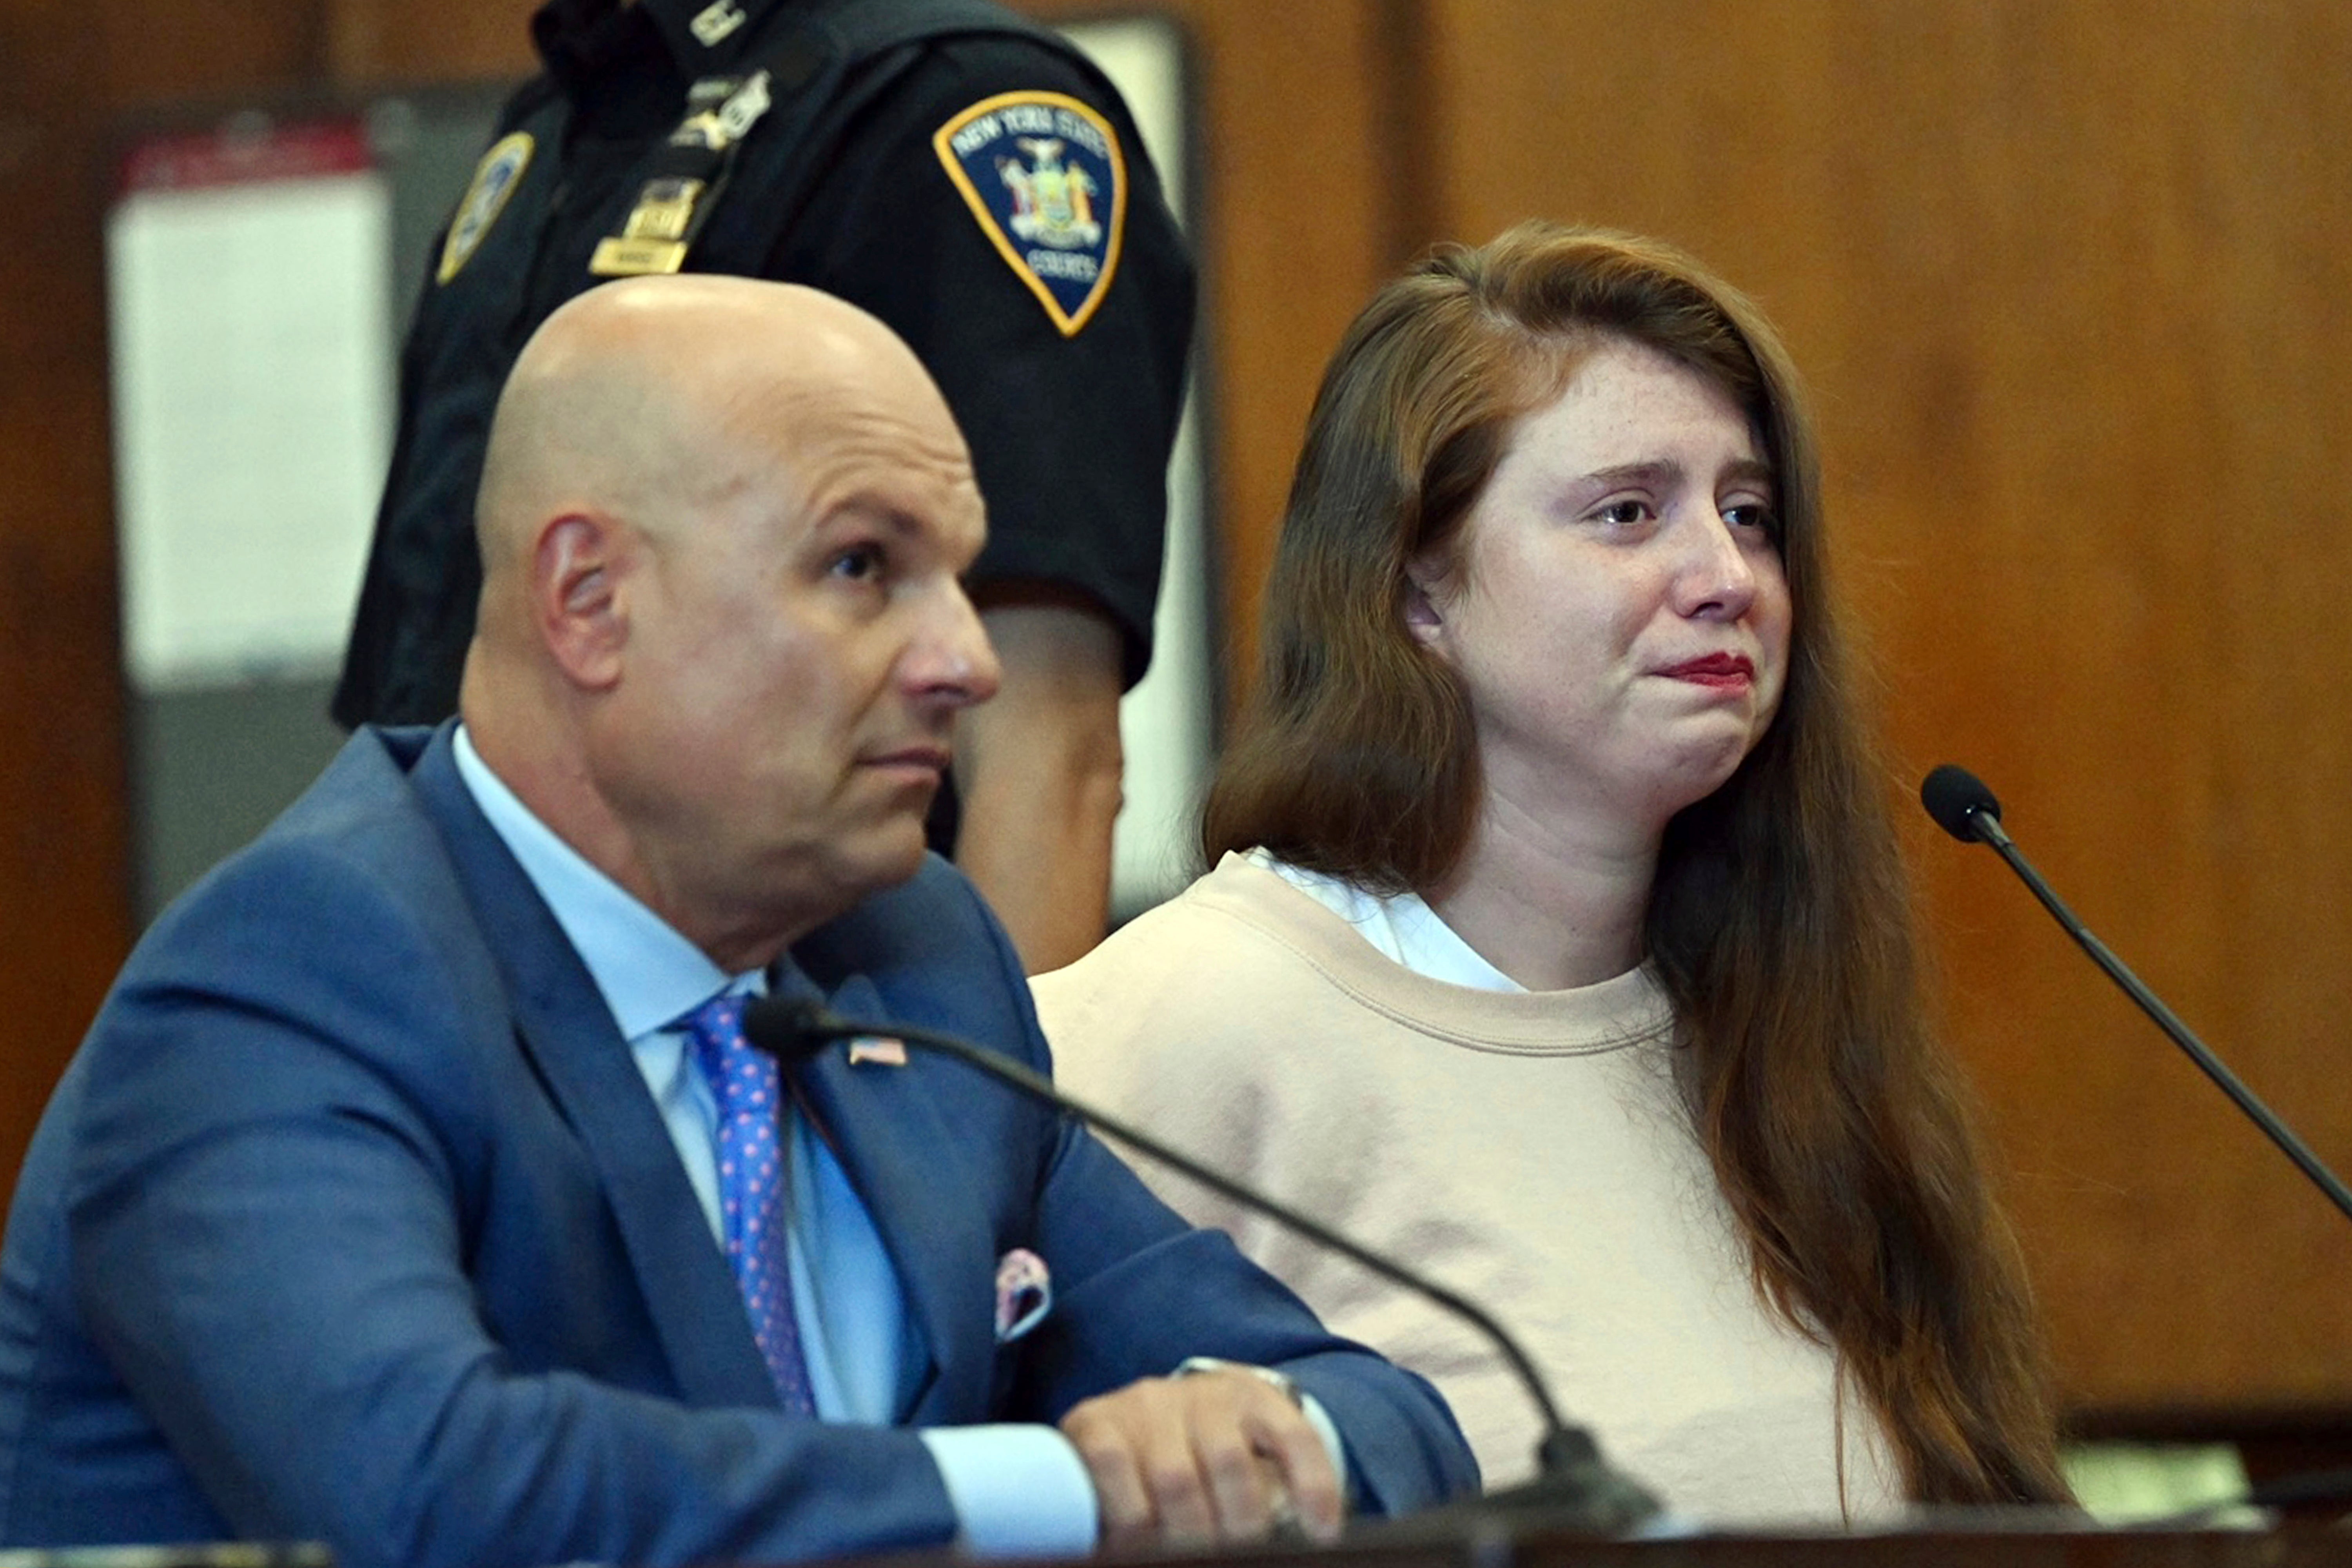 Lauren Pazienza appeared in court on Wednesday with her lawyer Arthur Aidala